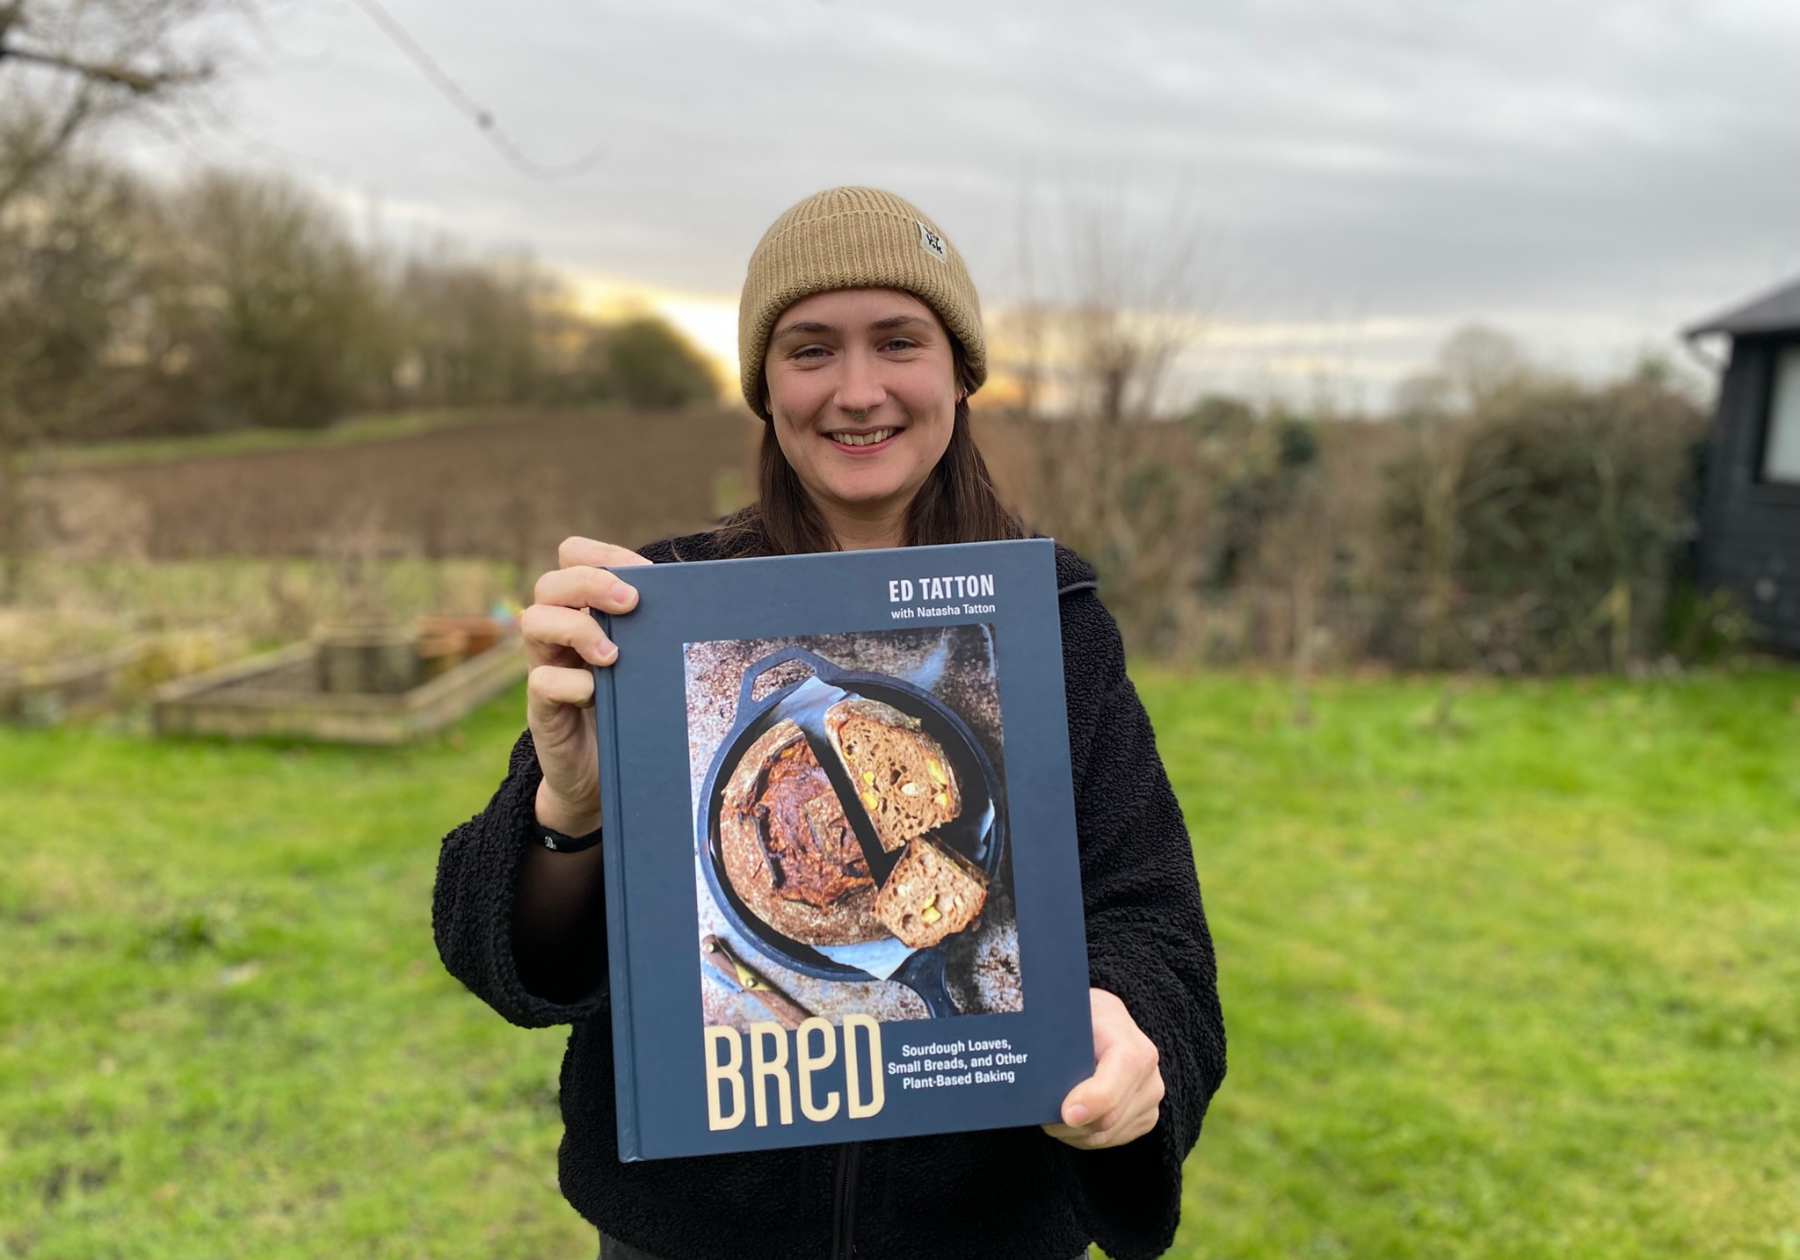 Lucy holding the BReD cookbook up to the camera